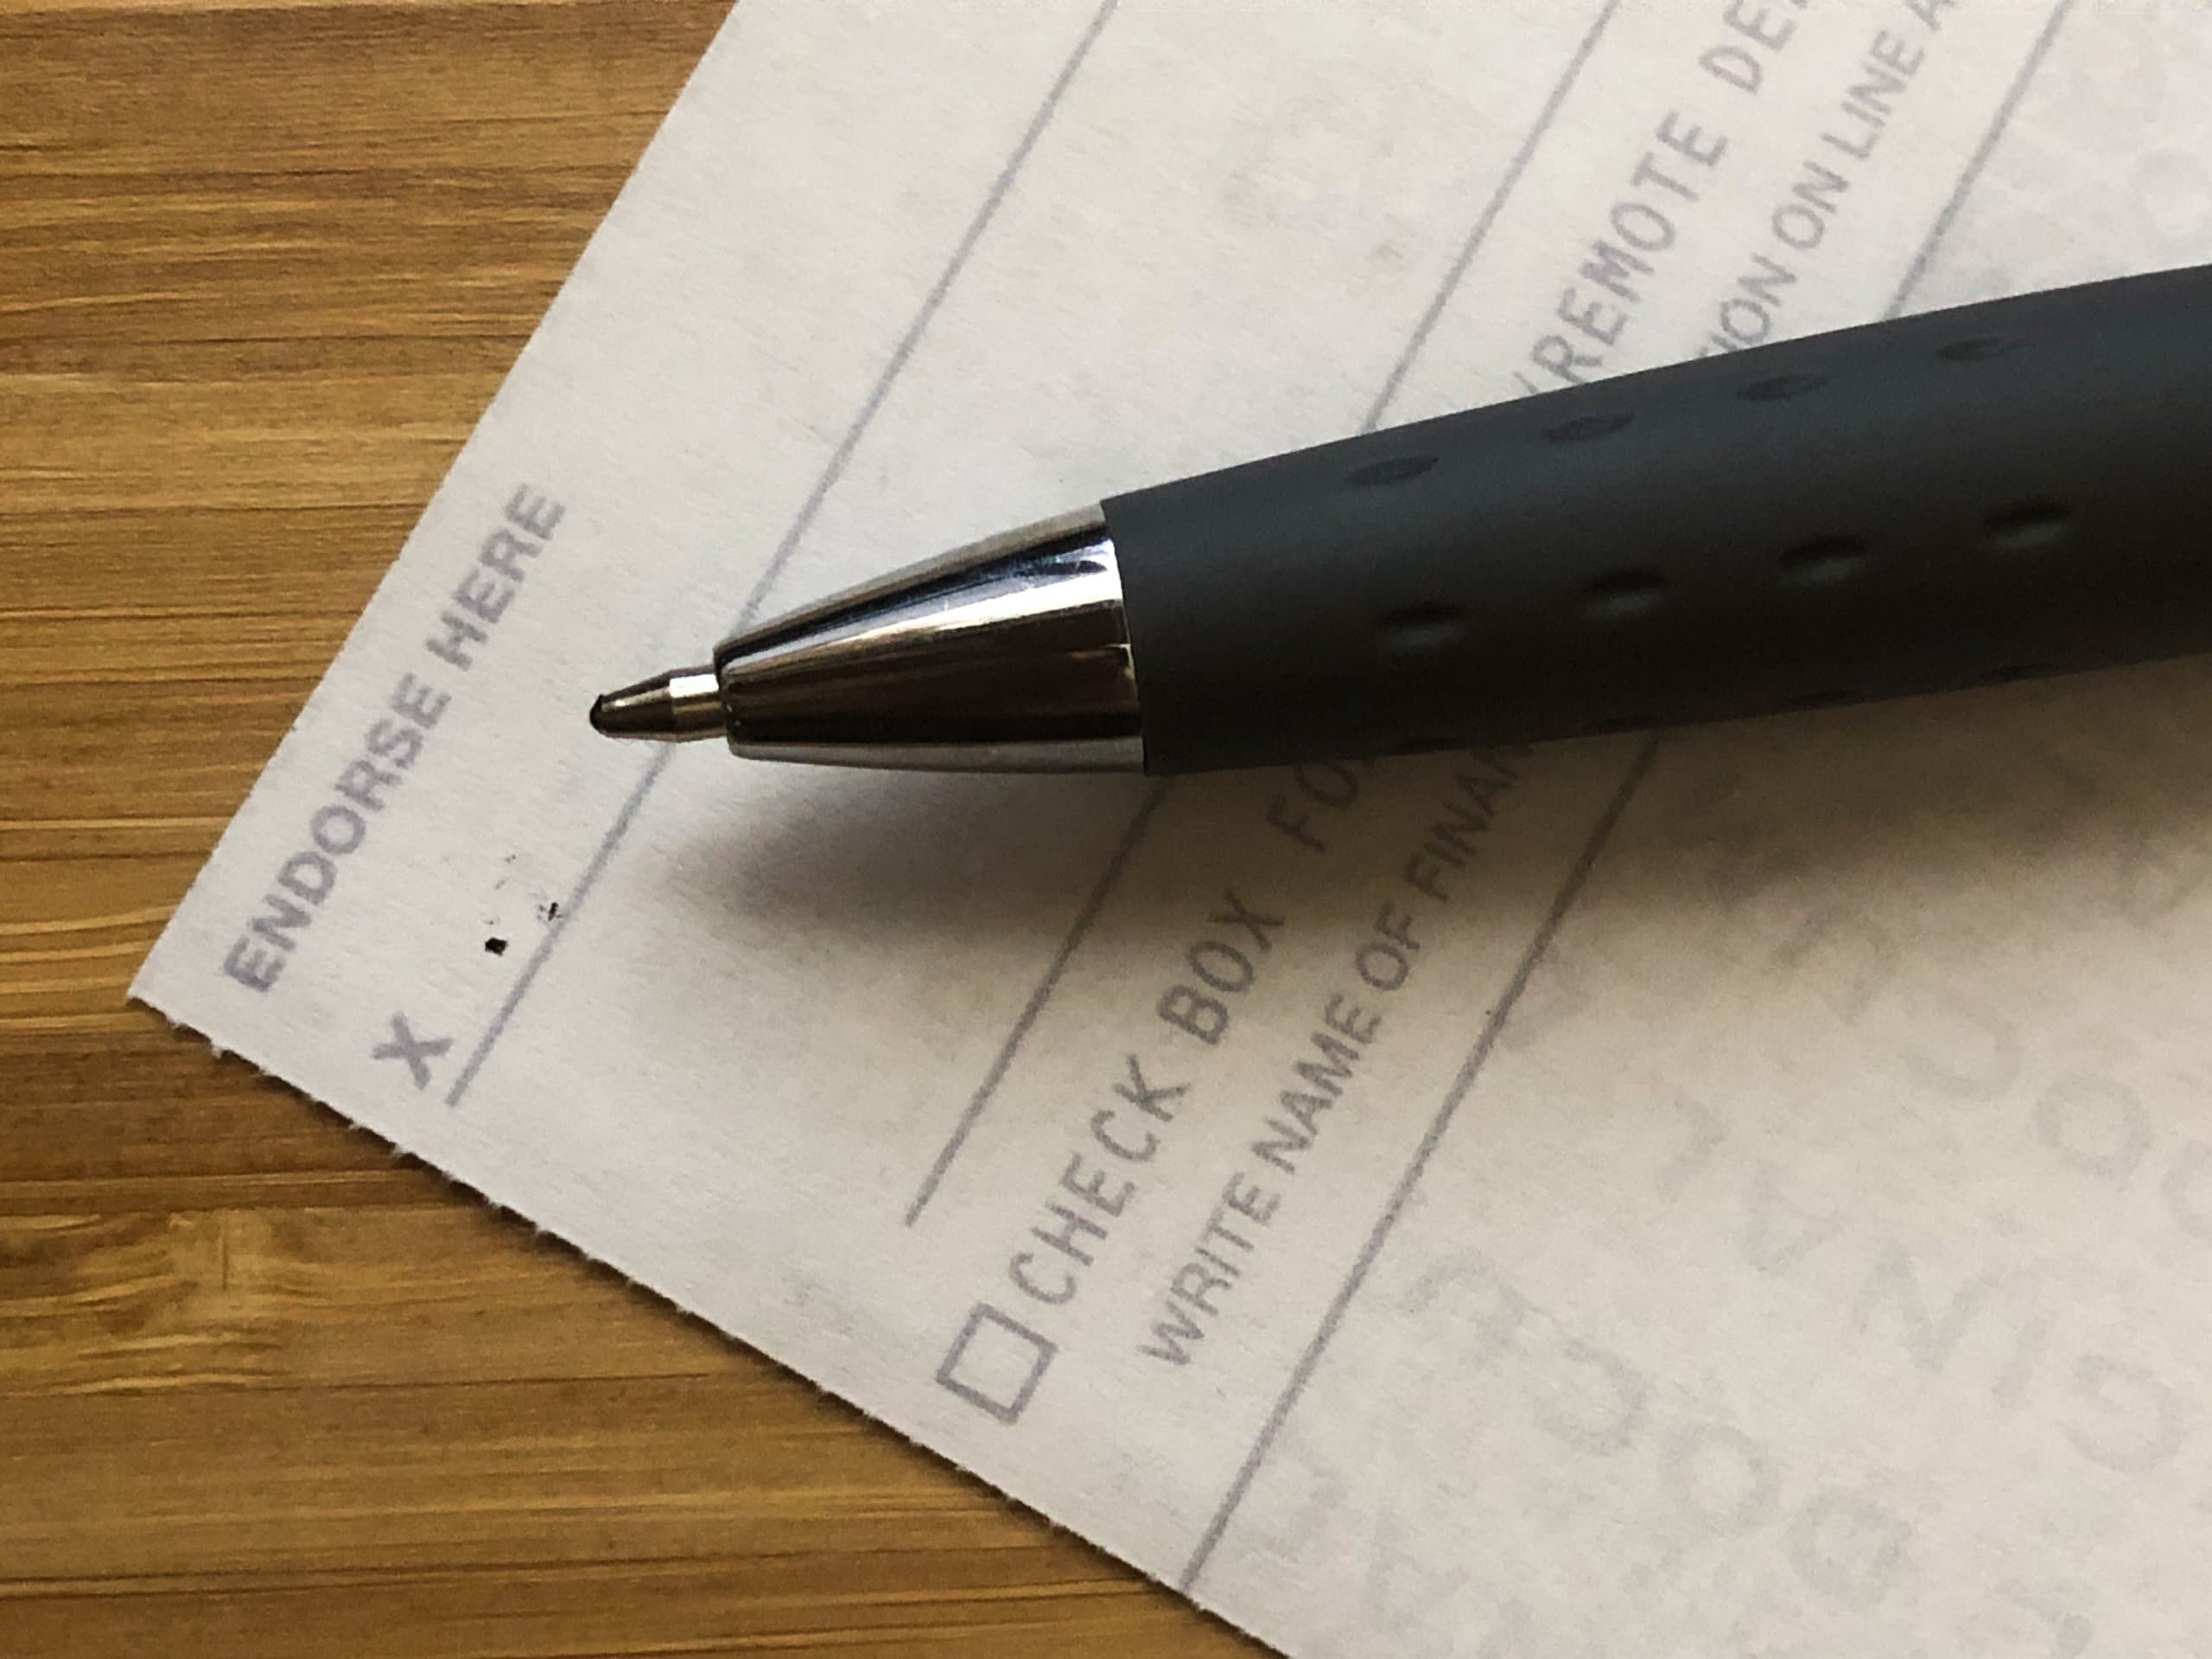 Pen resting on the back of a check at the "Endorse Here" line